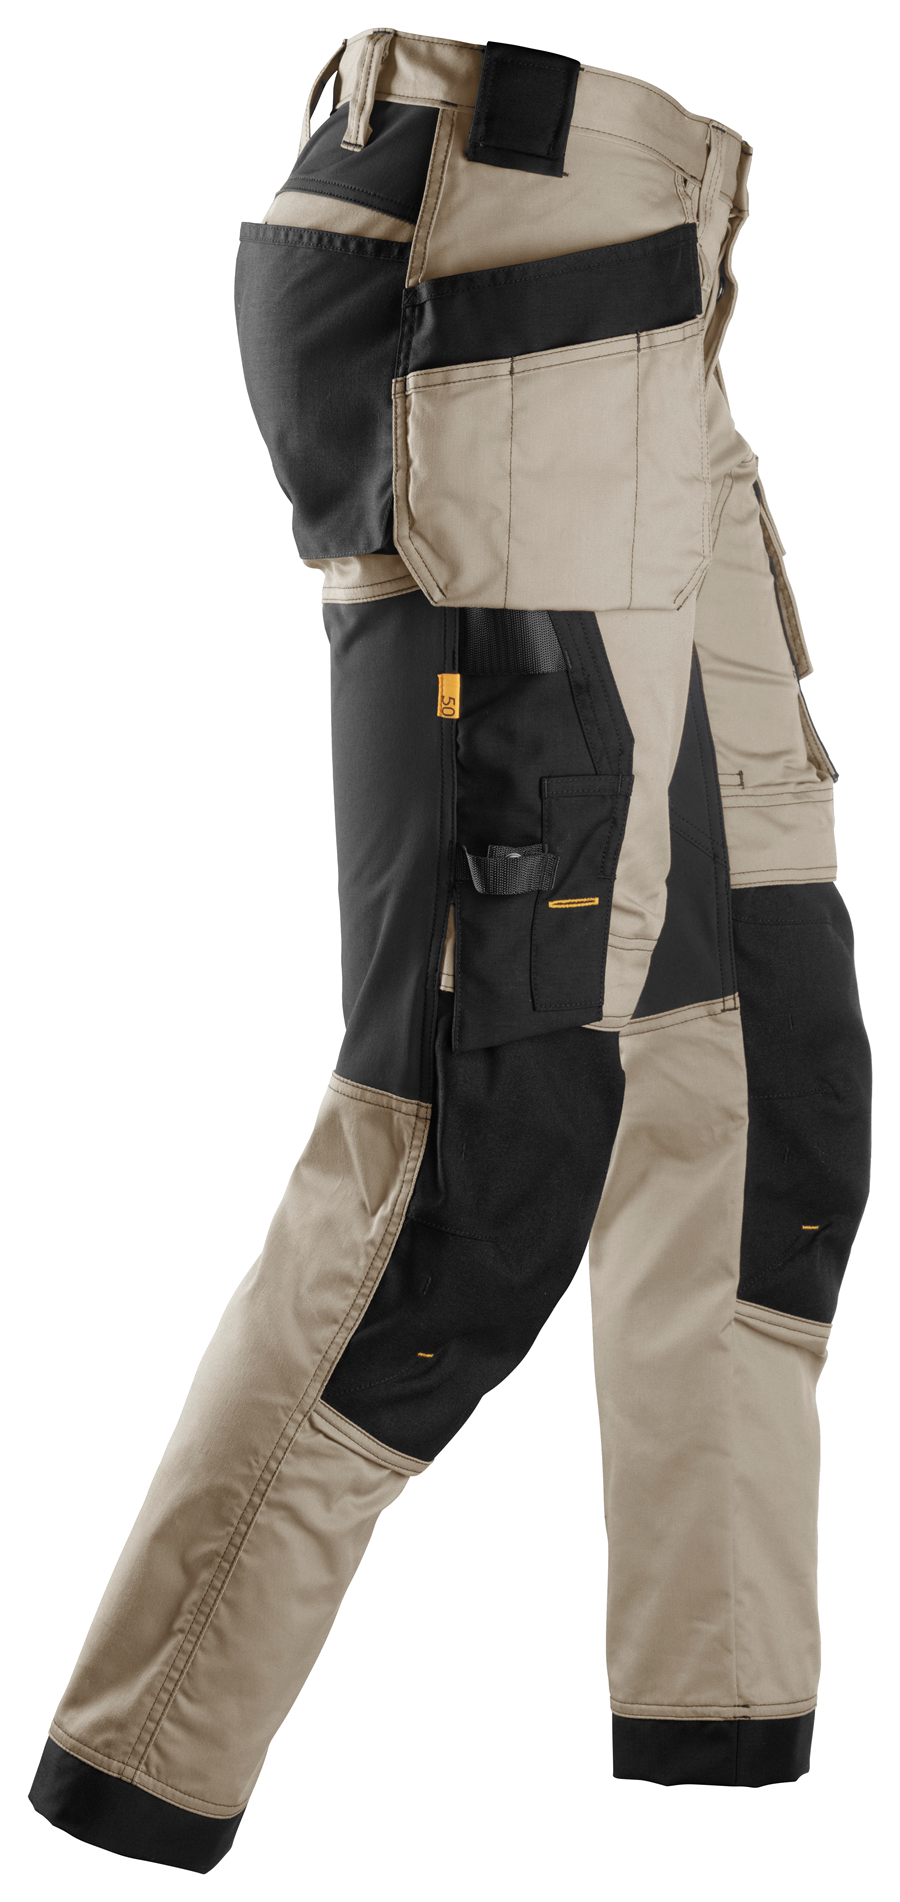 Snickers Workwear 6251 AllroundWork, stretch trousers with a loose fit with  holster pockets (62515604) - merXu - Negotiate prices! Wholesale purchases!